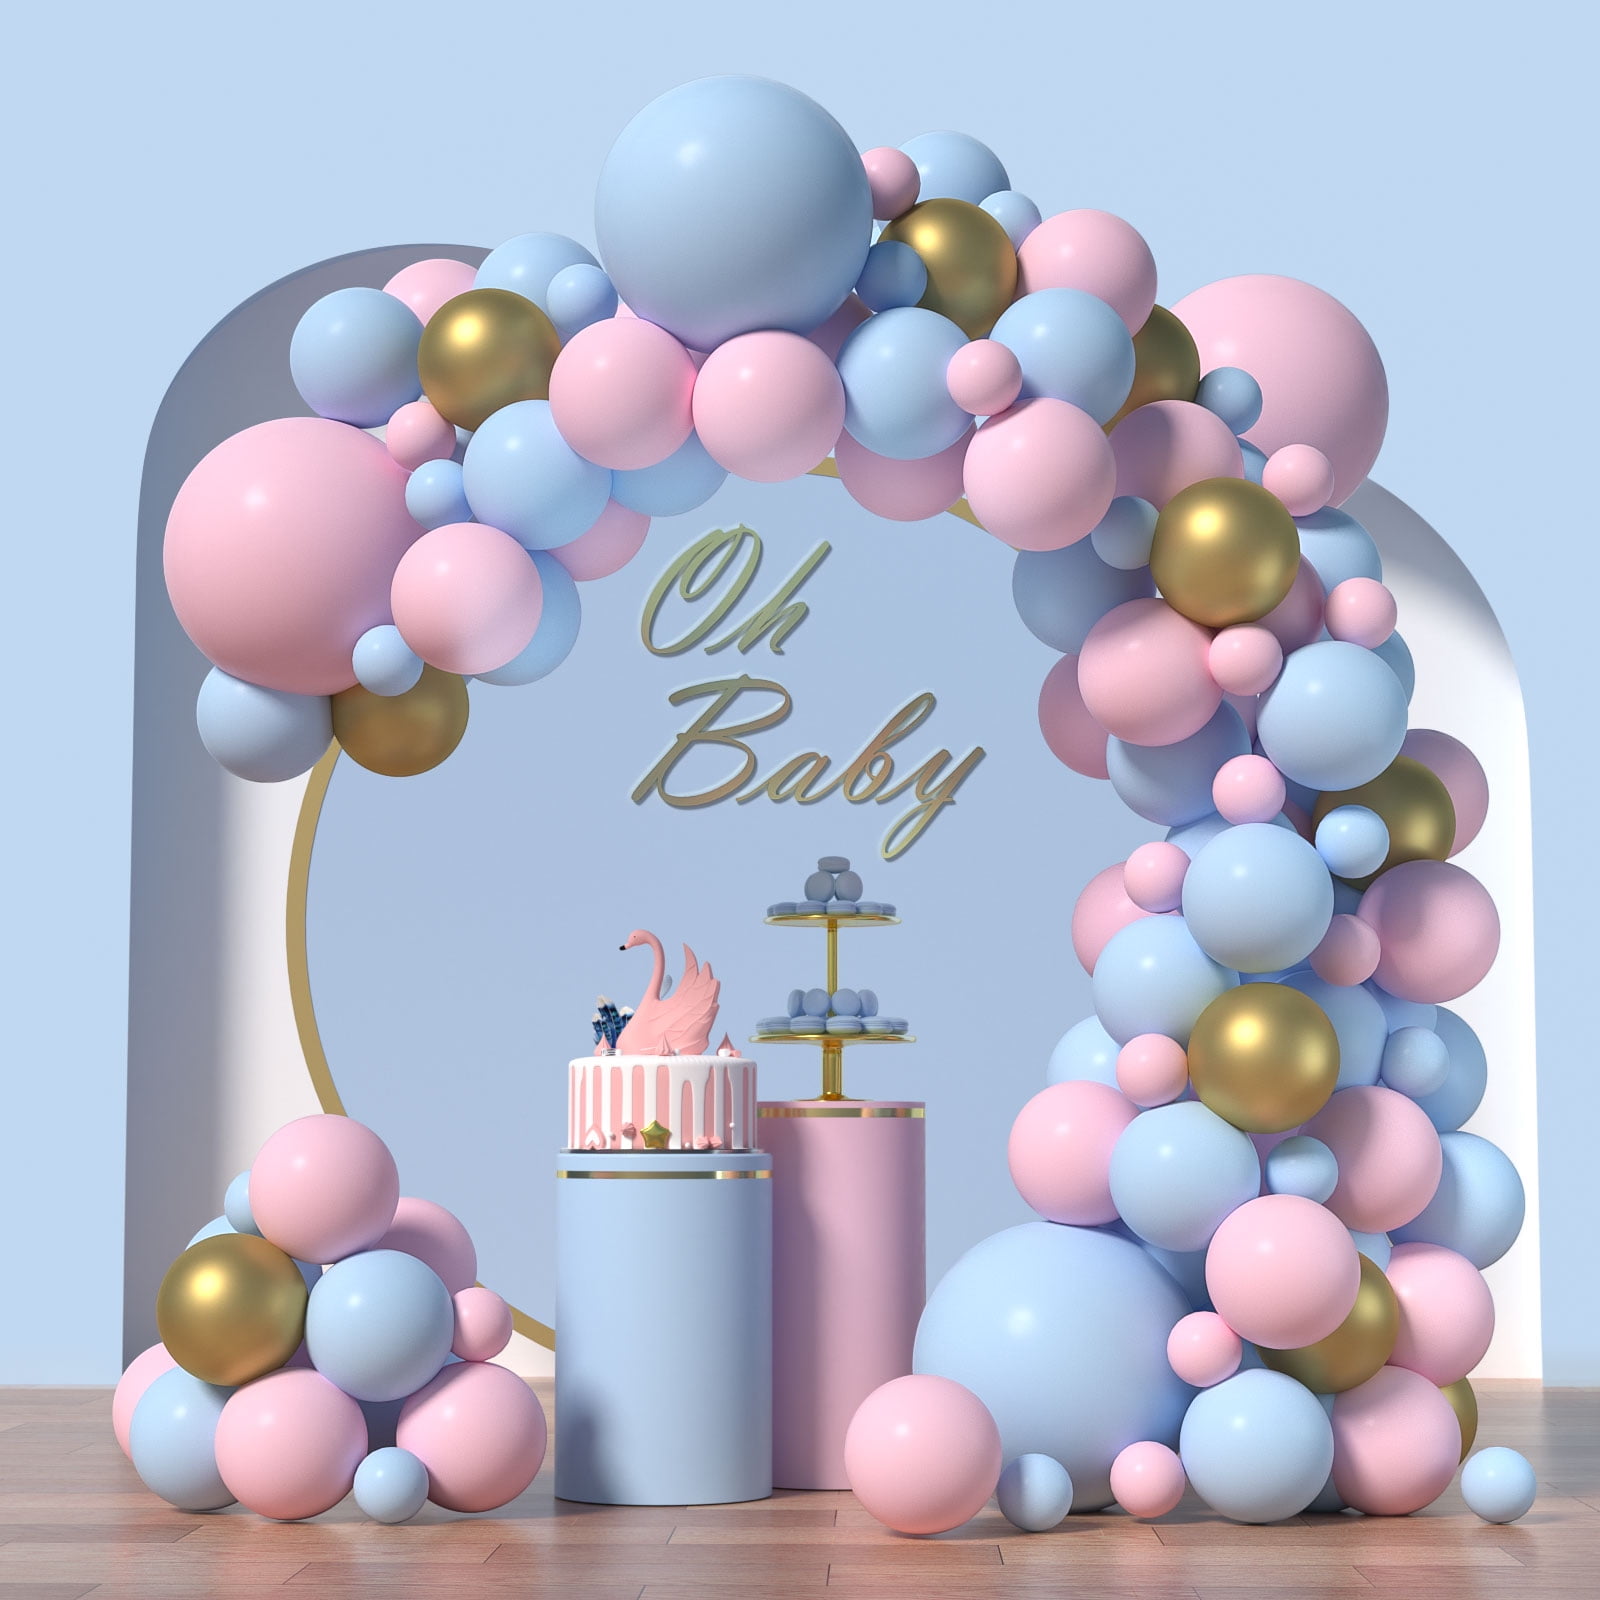  Boy Or Girl Gender Reveal Party Decoration Set,&Balloons Arch  Garland Kit,Foil Balloons,Curtains,Paper tassel Garland,Balloon decoration  tools,For Party Photo Backdrop (Pink/Blue) Shower Birthday : Toys & Games